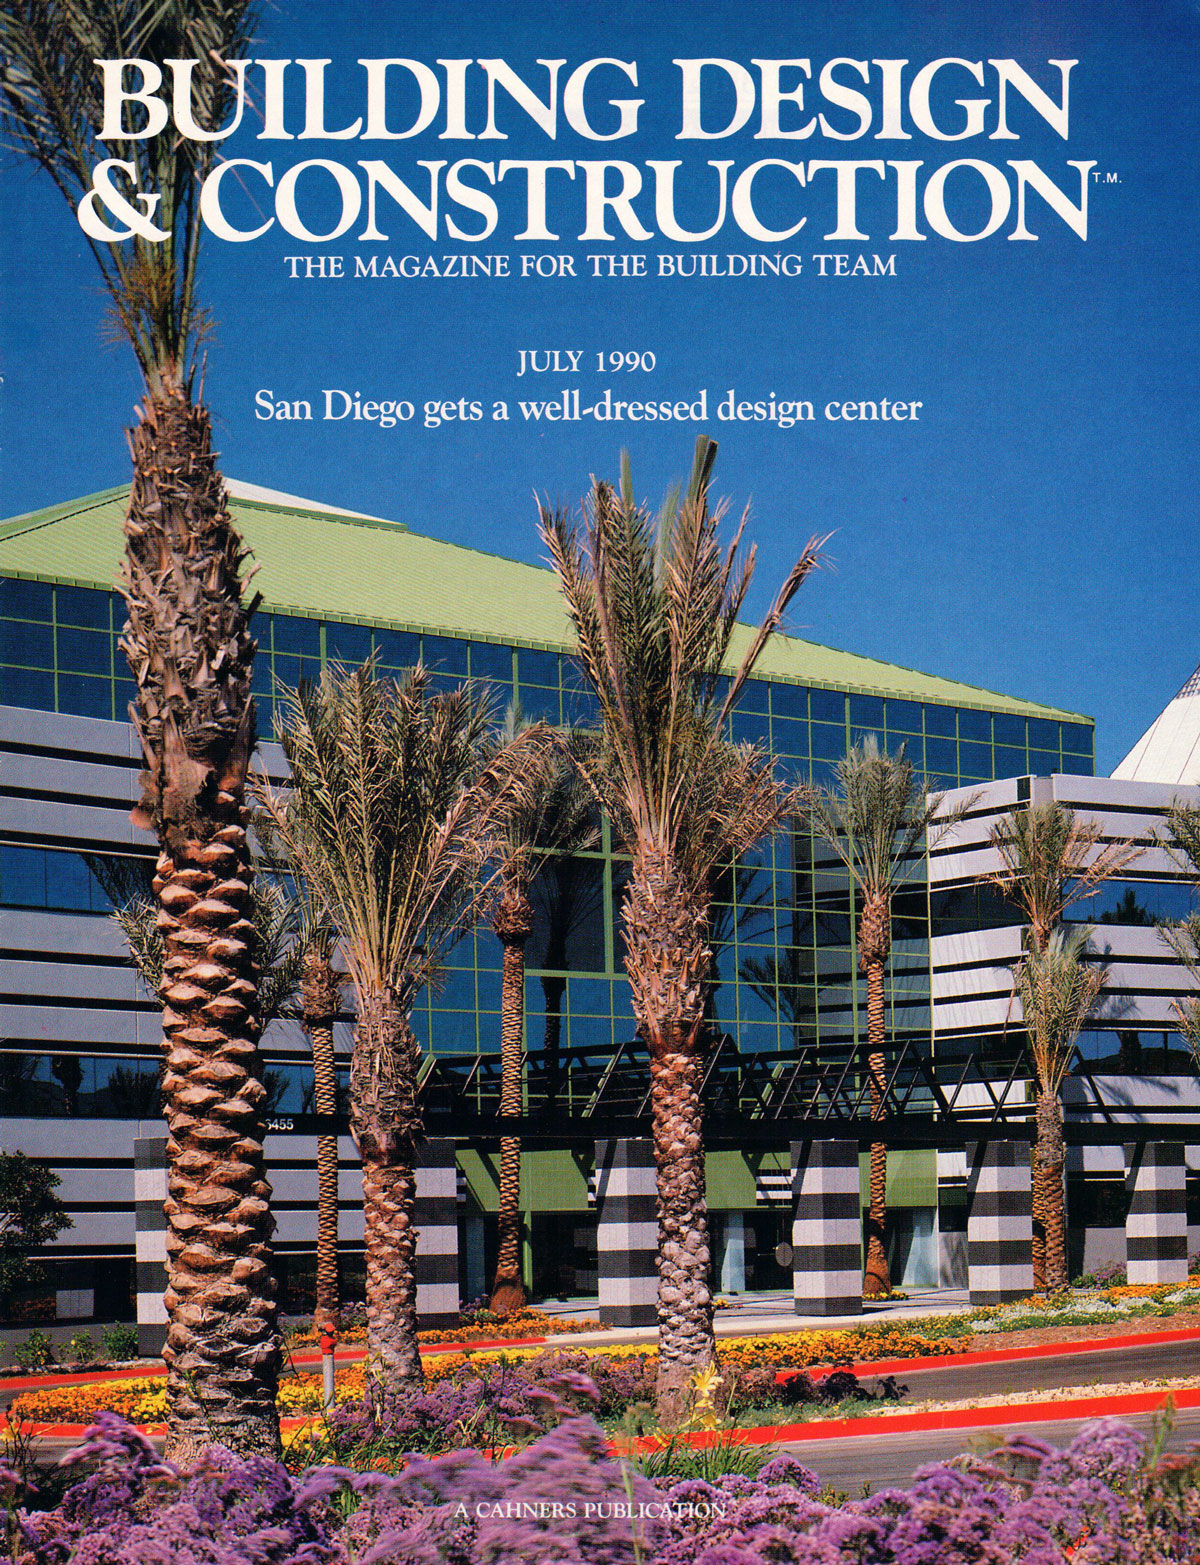 Magazine cover for the construction of San Diego Design Center